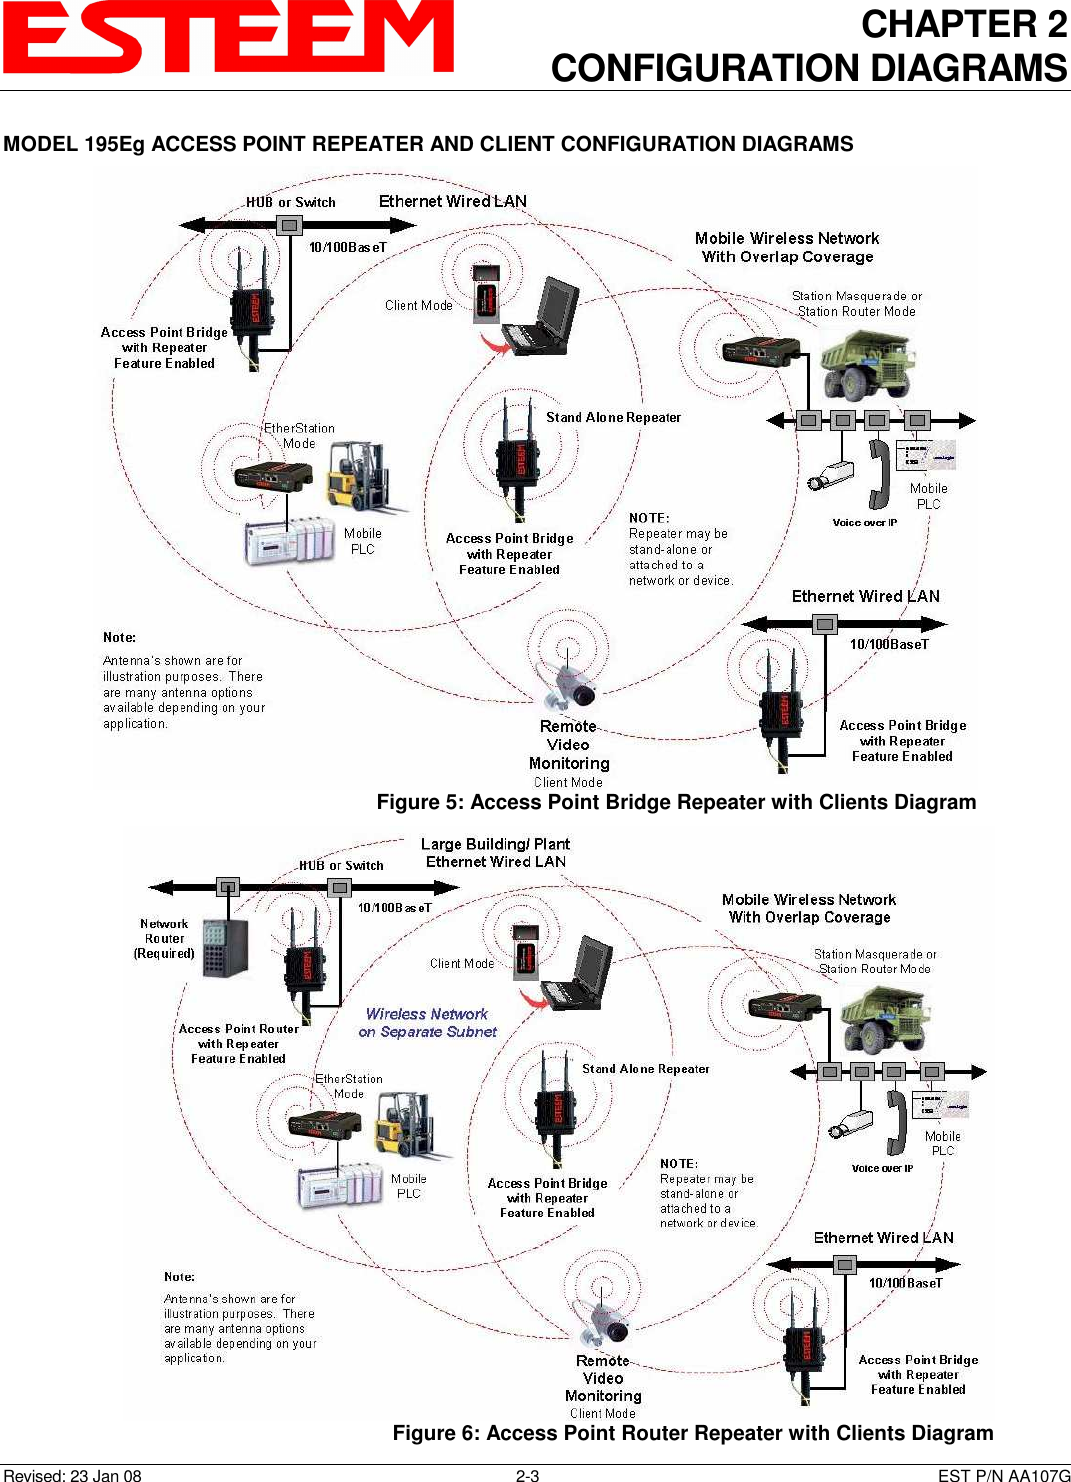 CHAPTER 2 CONFIGURATION DIAGRAMS   Revised: 23 Jan 08  2-3  EST P/N AA107G MODEL 195Eg ACCESS POINT REPEATER AND CLIENT CONFIGURATION DIAGRAMS  Figure 5: Access Point Bridge Repeater with Clients Diagram  Figure 6: Access Point Router Repeater with Clients Diagram 